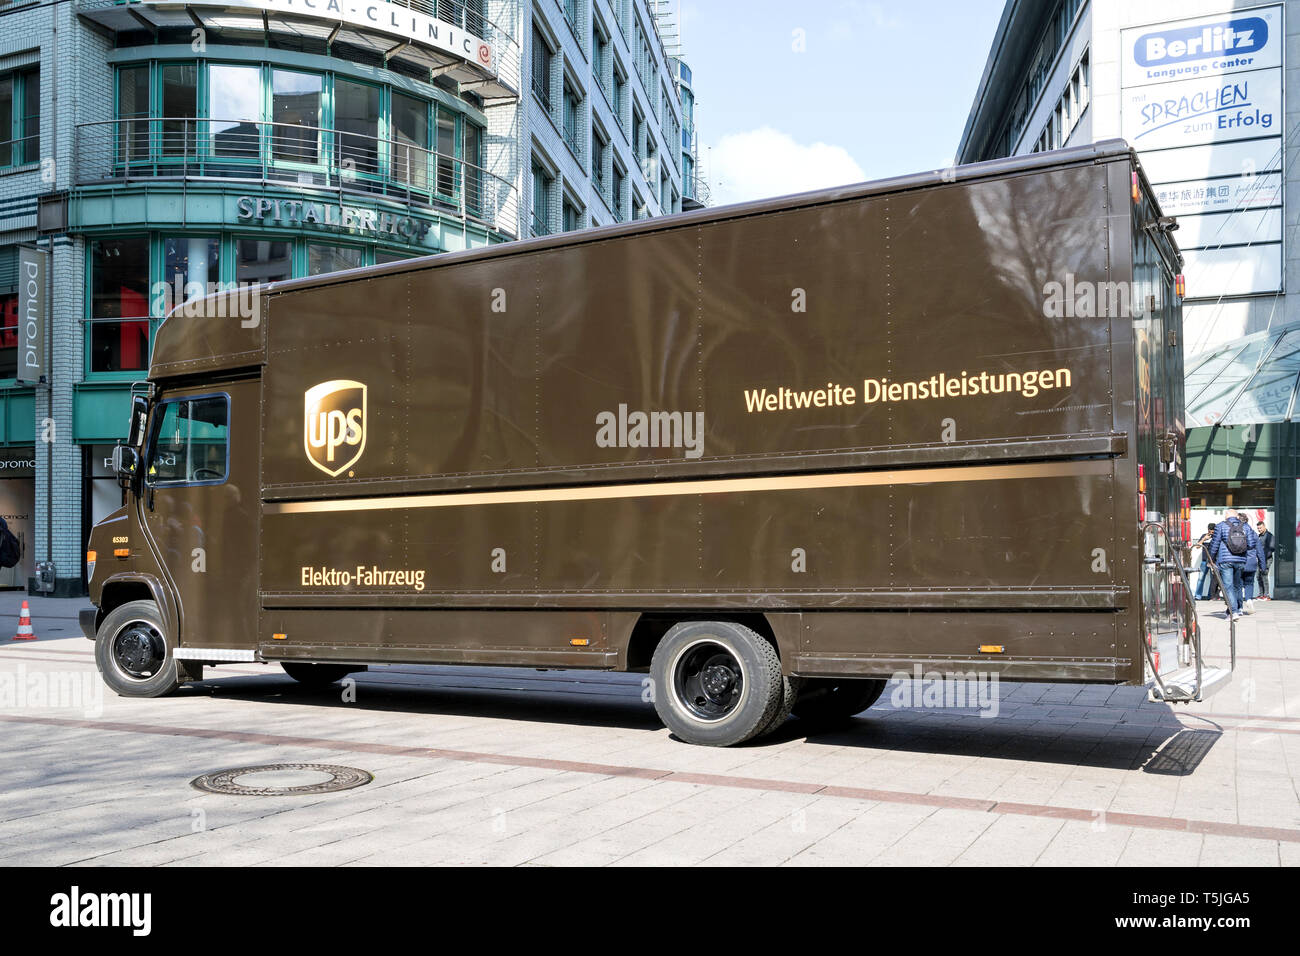 Electric powered UPS delivery van. UPS is the world's largest package delivery company and a provider of supply chain management solutions. Stock Photo